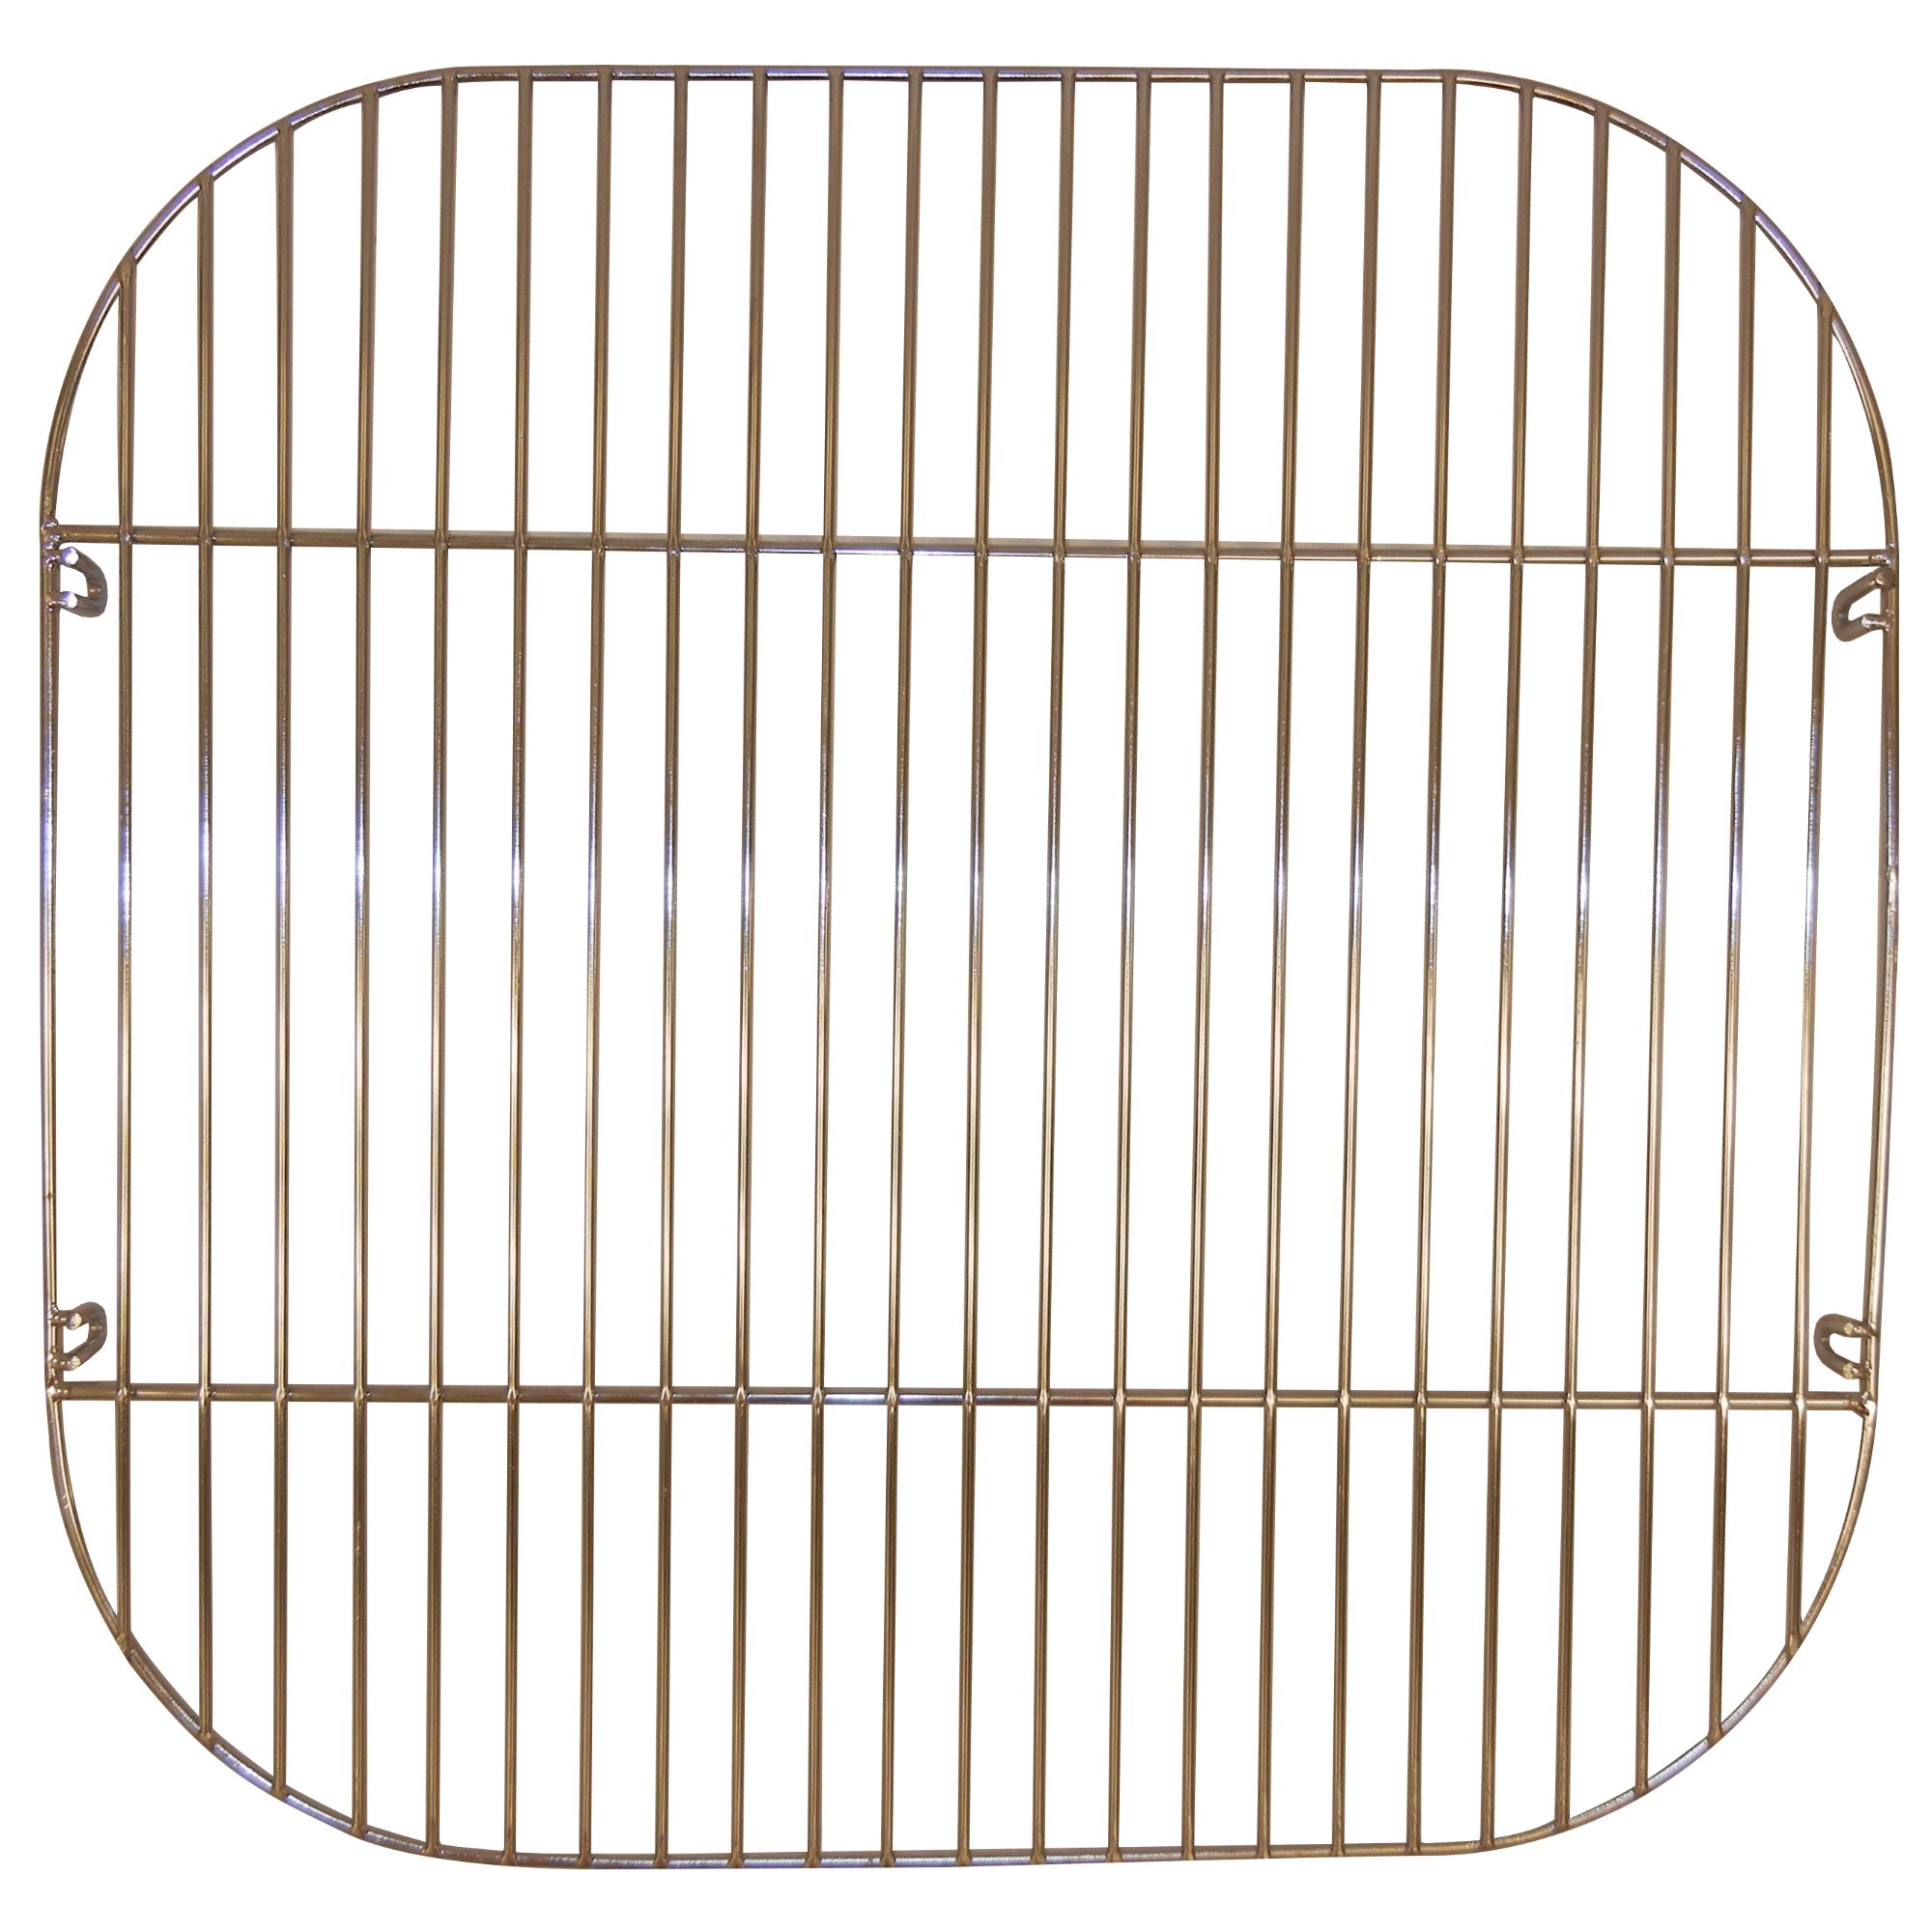 Contemporary Home Living Music City Metals 44281 Chrome Steel Wire Cooking Grid Replacement for Gas Grill Models Aussie 4280 and Aussie 4280-0A113